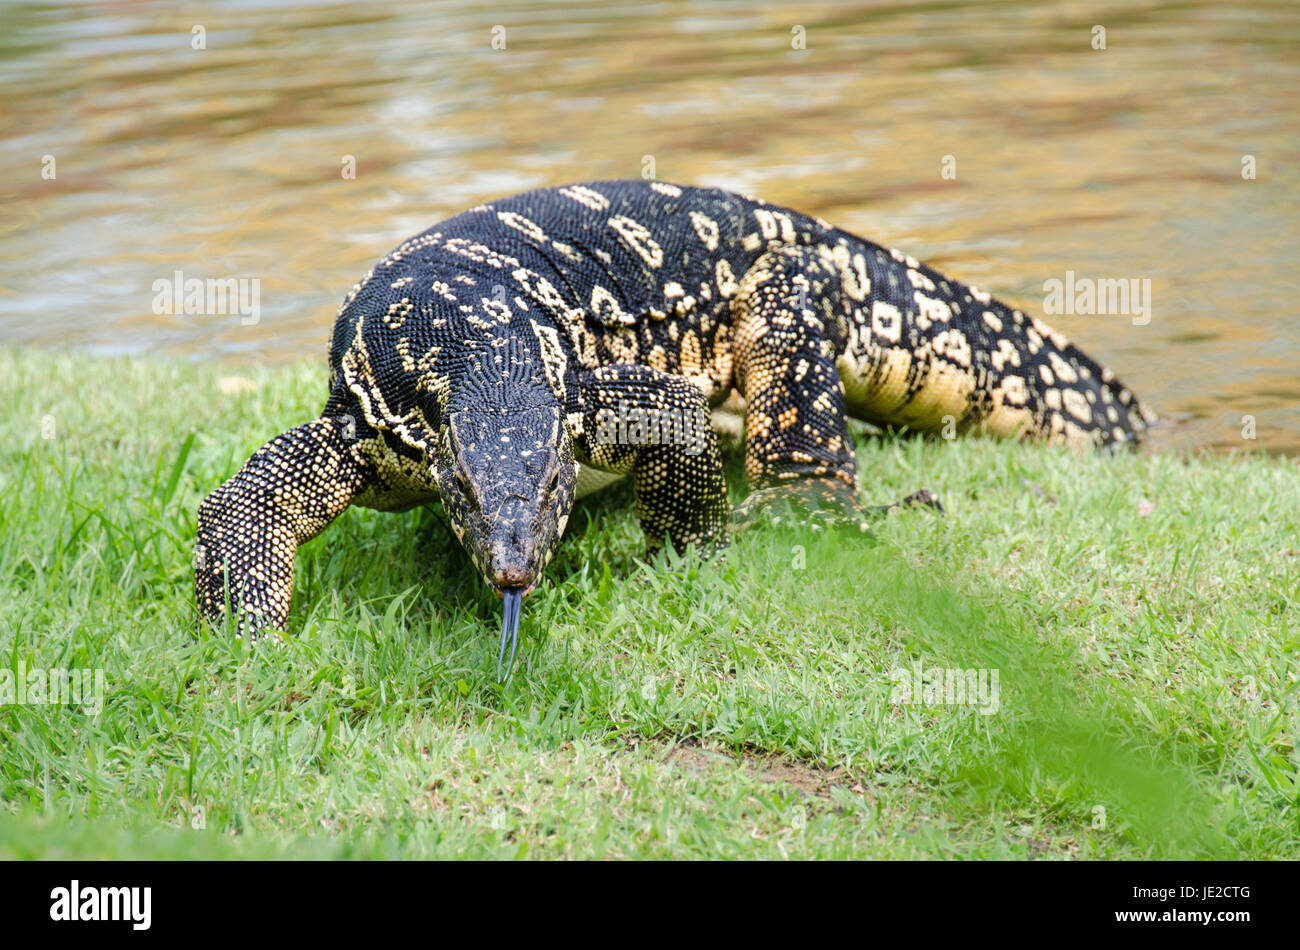 Asian water monitor (Varanus salvator) commonly found roaming free in public park Stock Photo